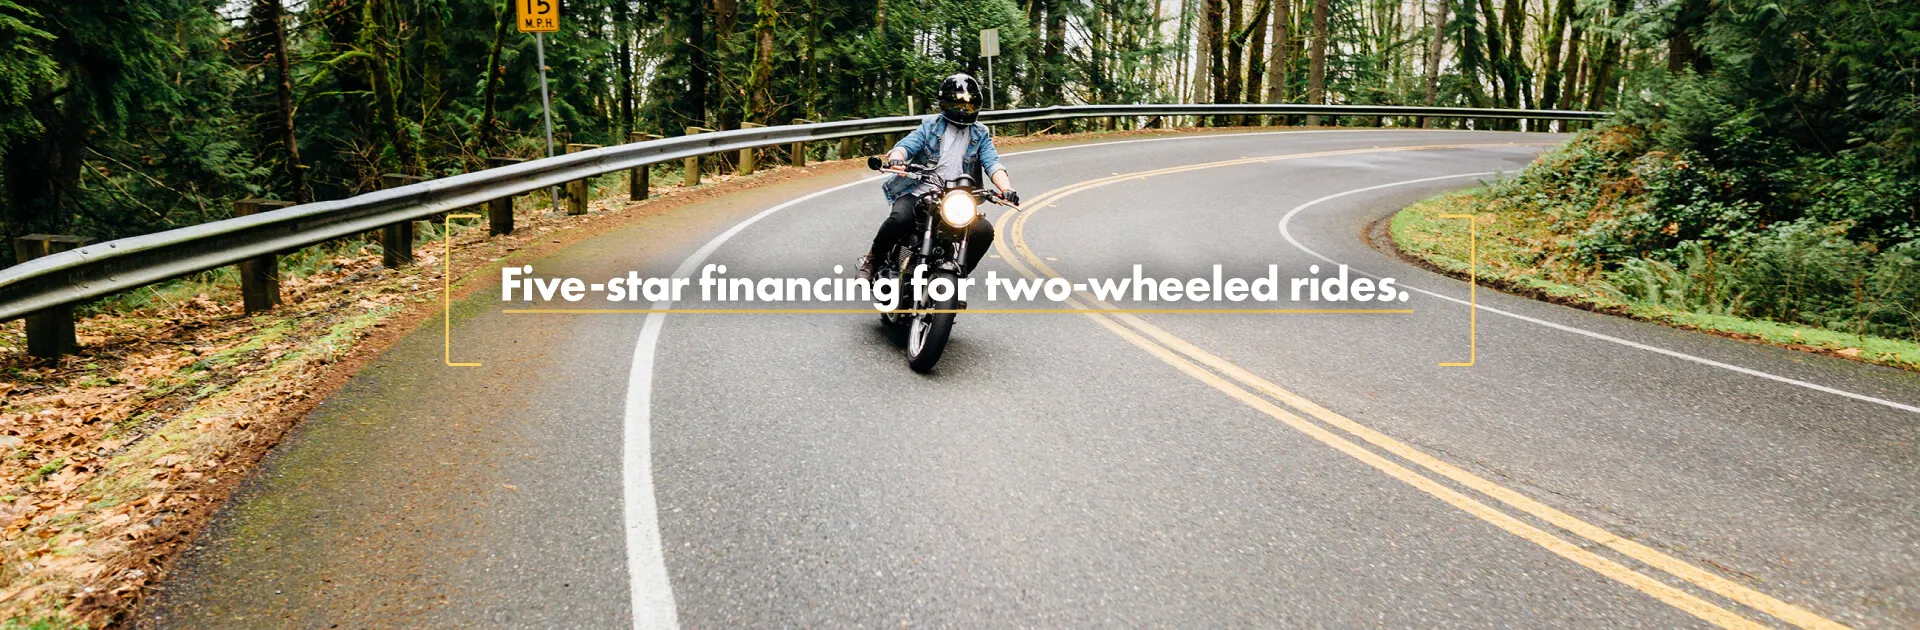 Five-star financing for two-wheeled rides.